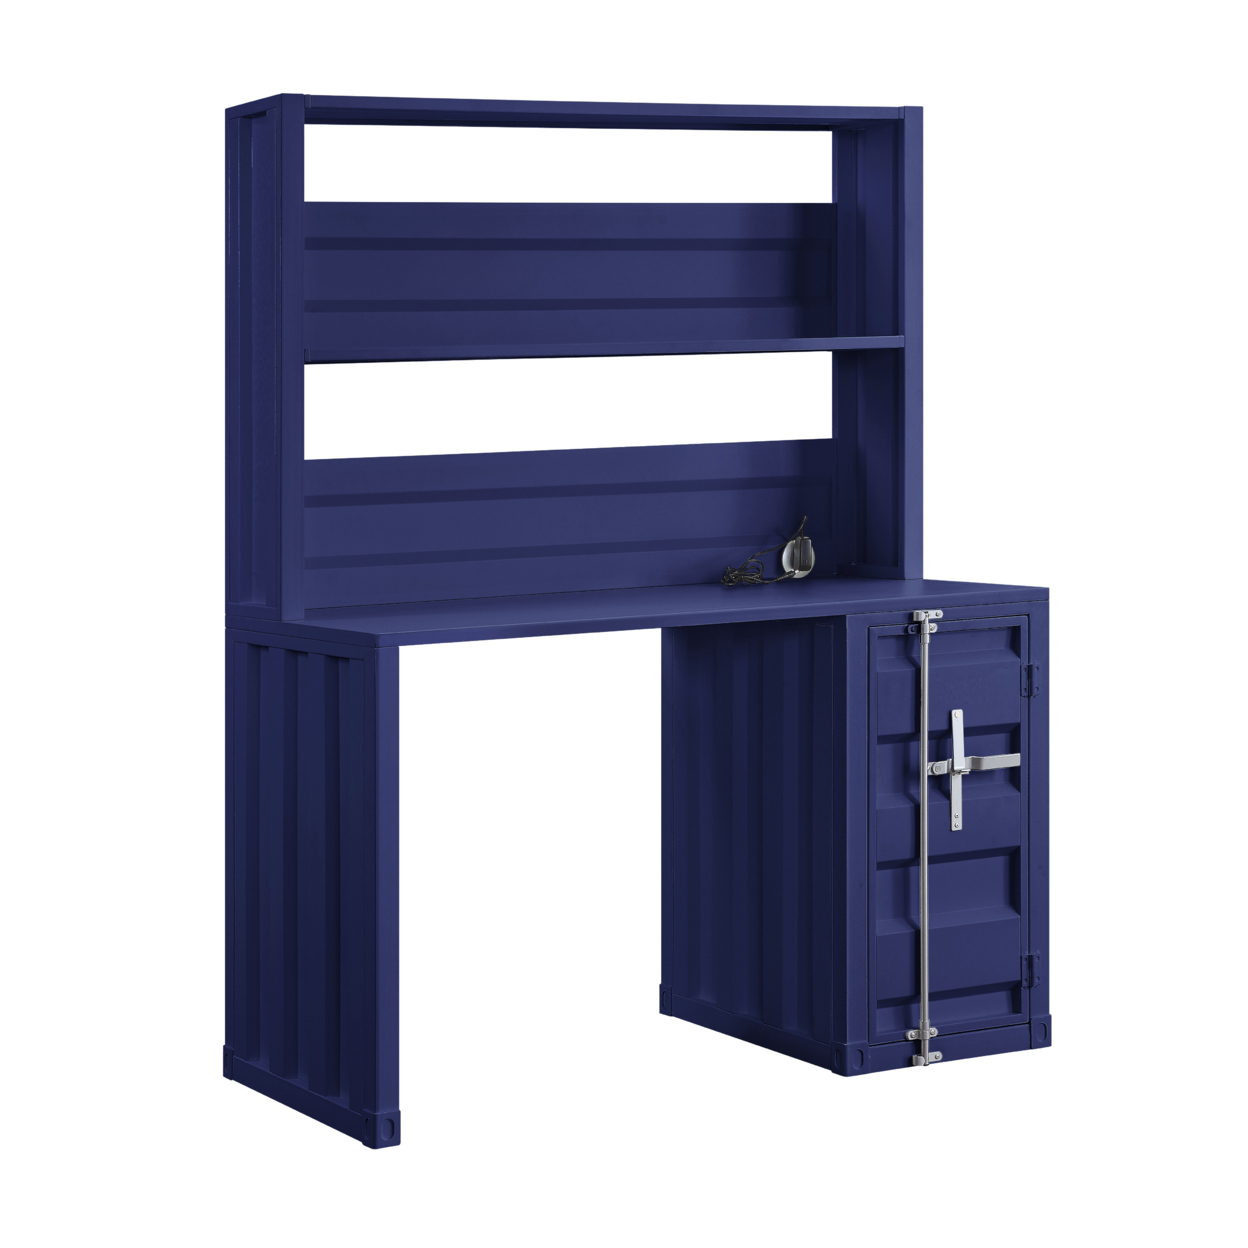 Metal Base Dusk And Hutch With Storage Space And Recessed Panels, Blue- Saltoro Sherpi